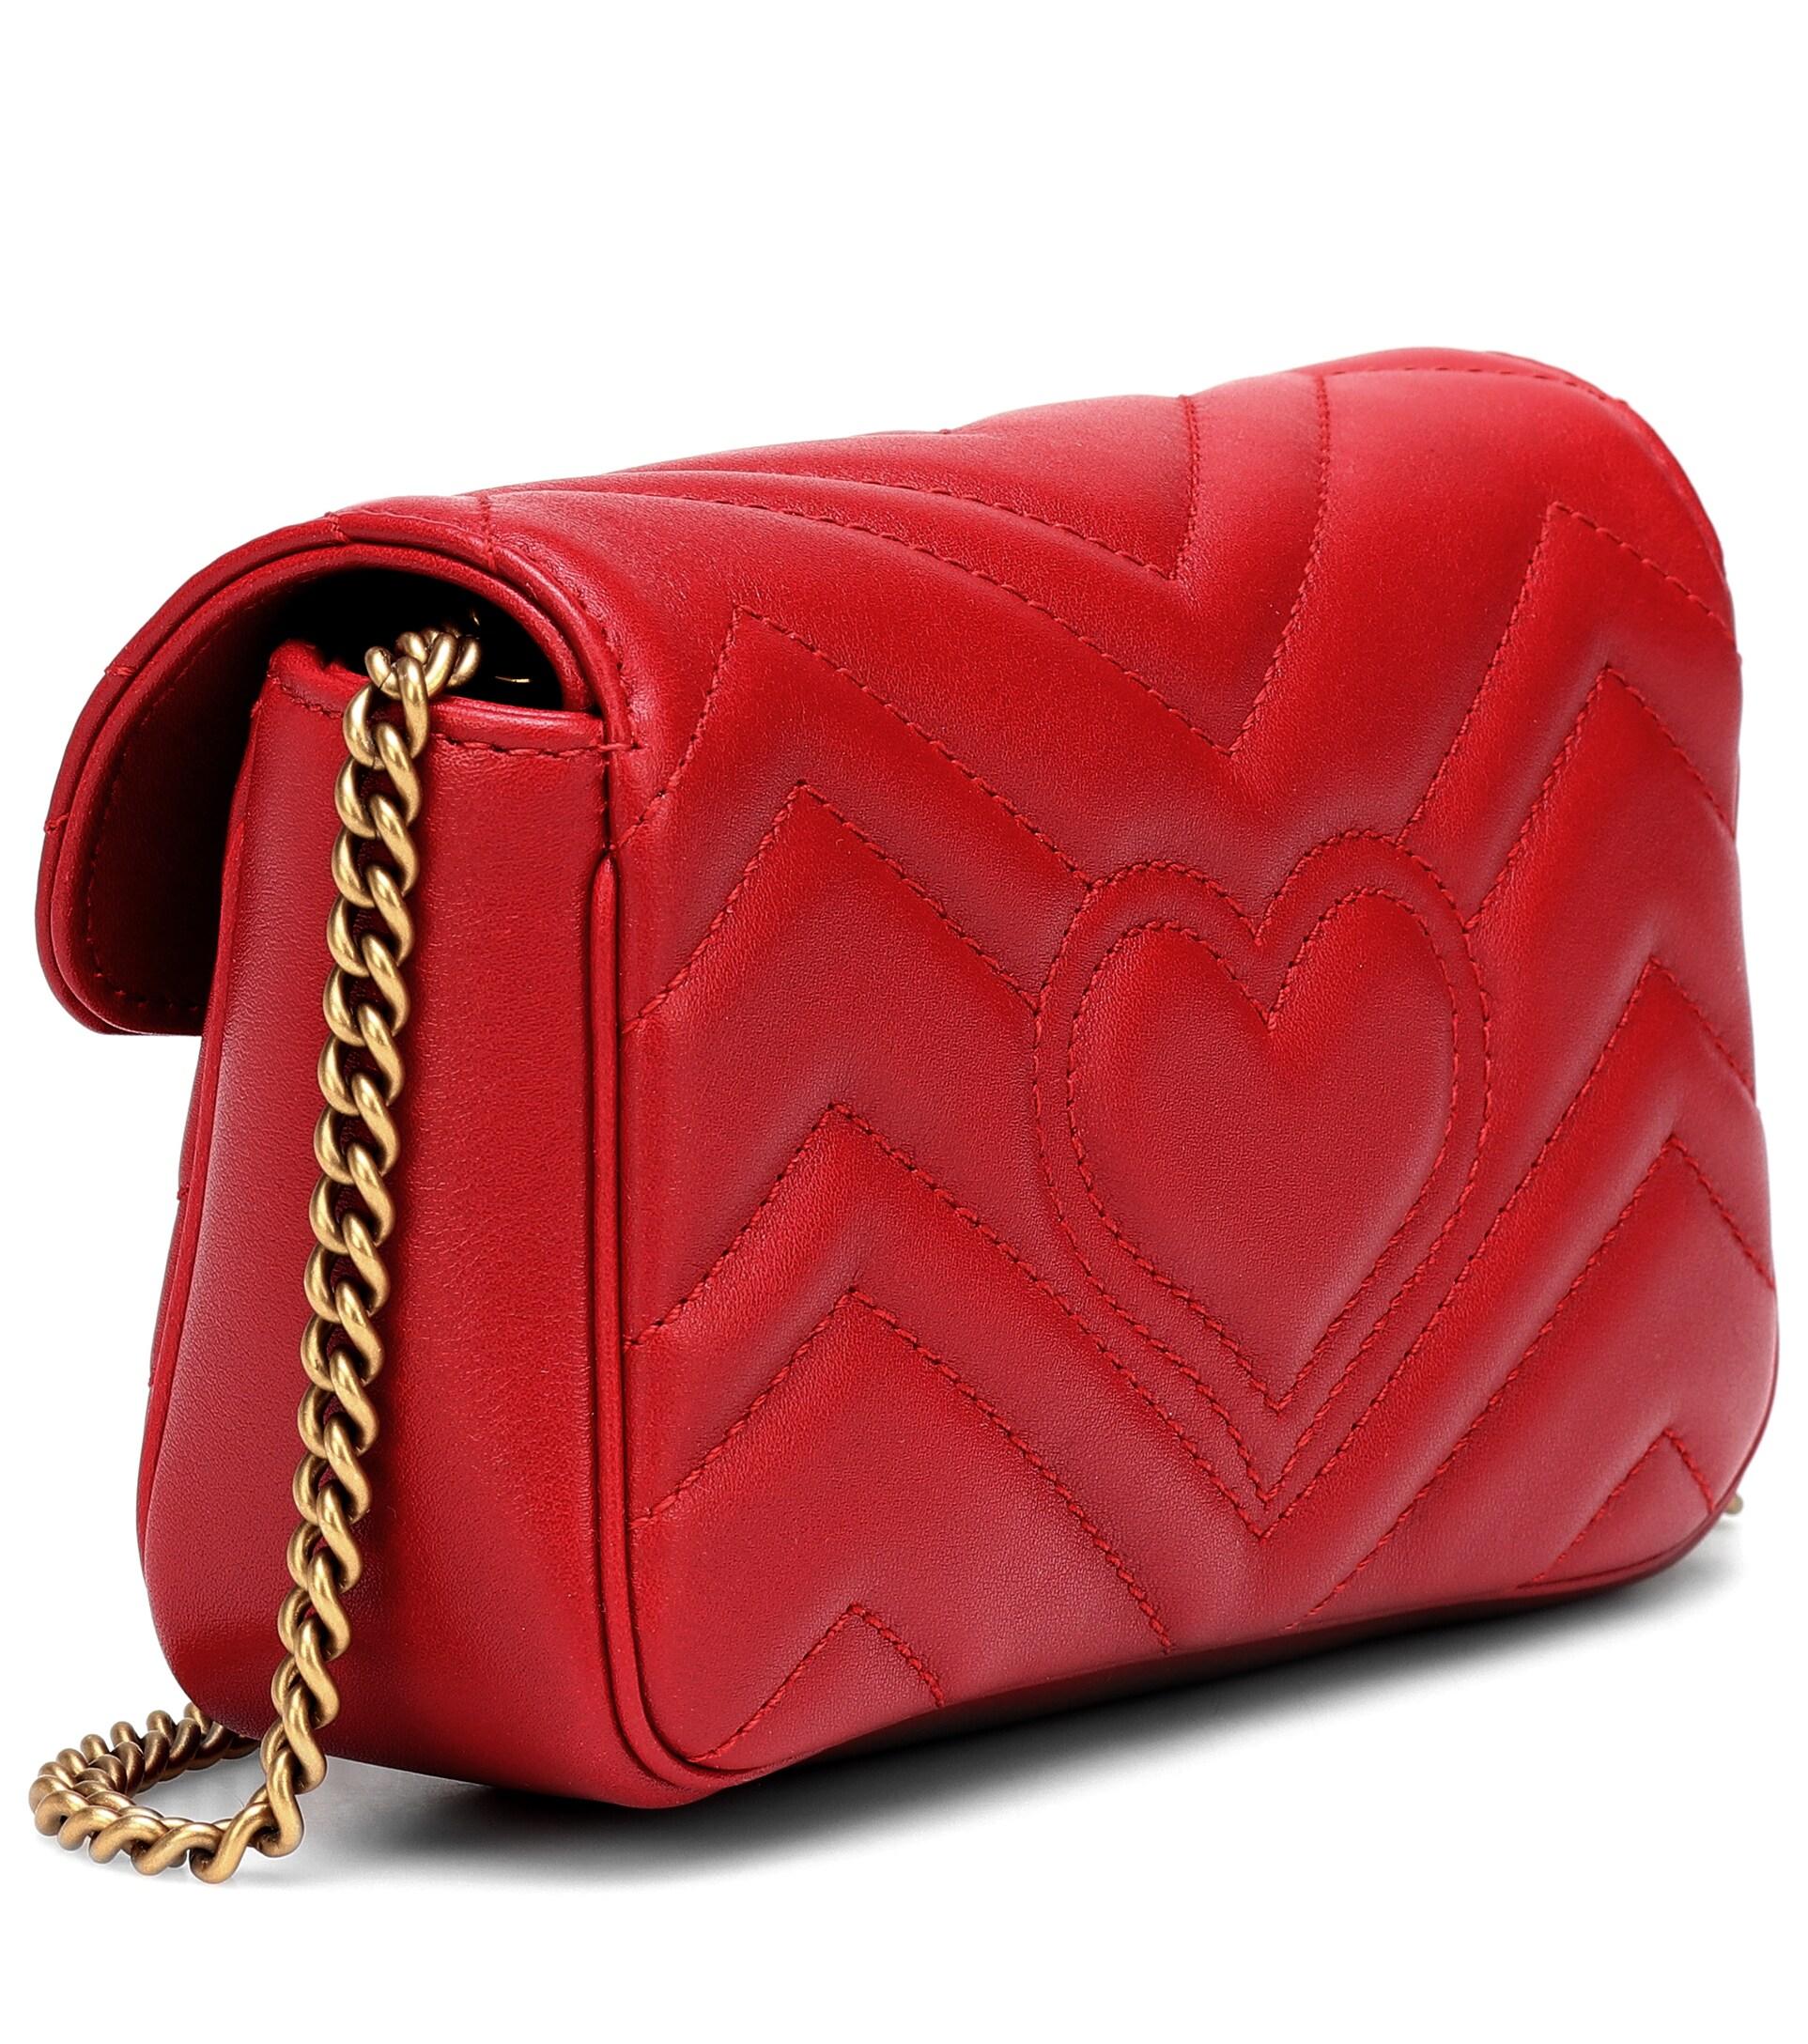 Gucci GG Marmont Small Leather Matelassé Shoulder Bag in Red - Save 53% |  Lyst